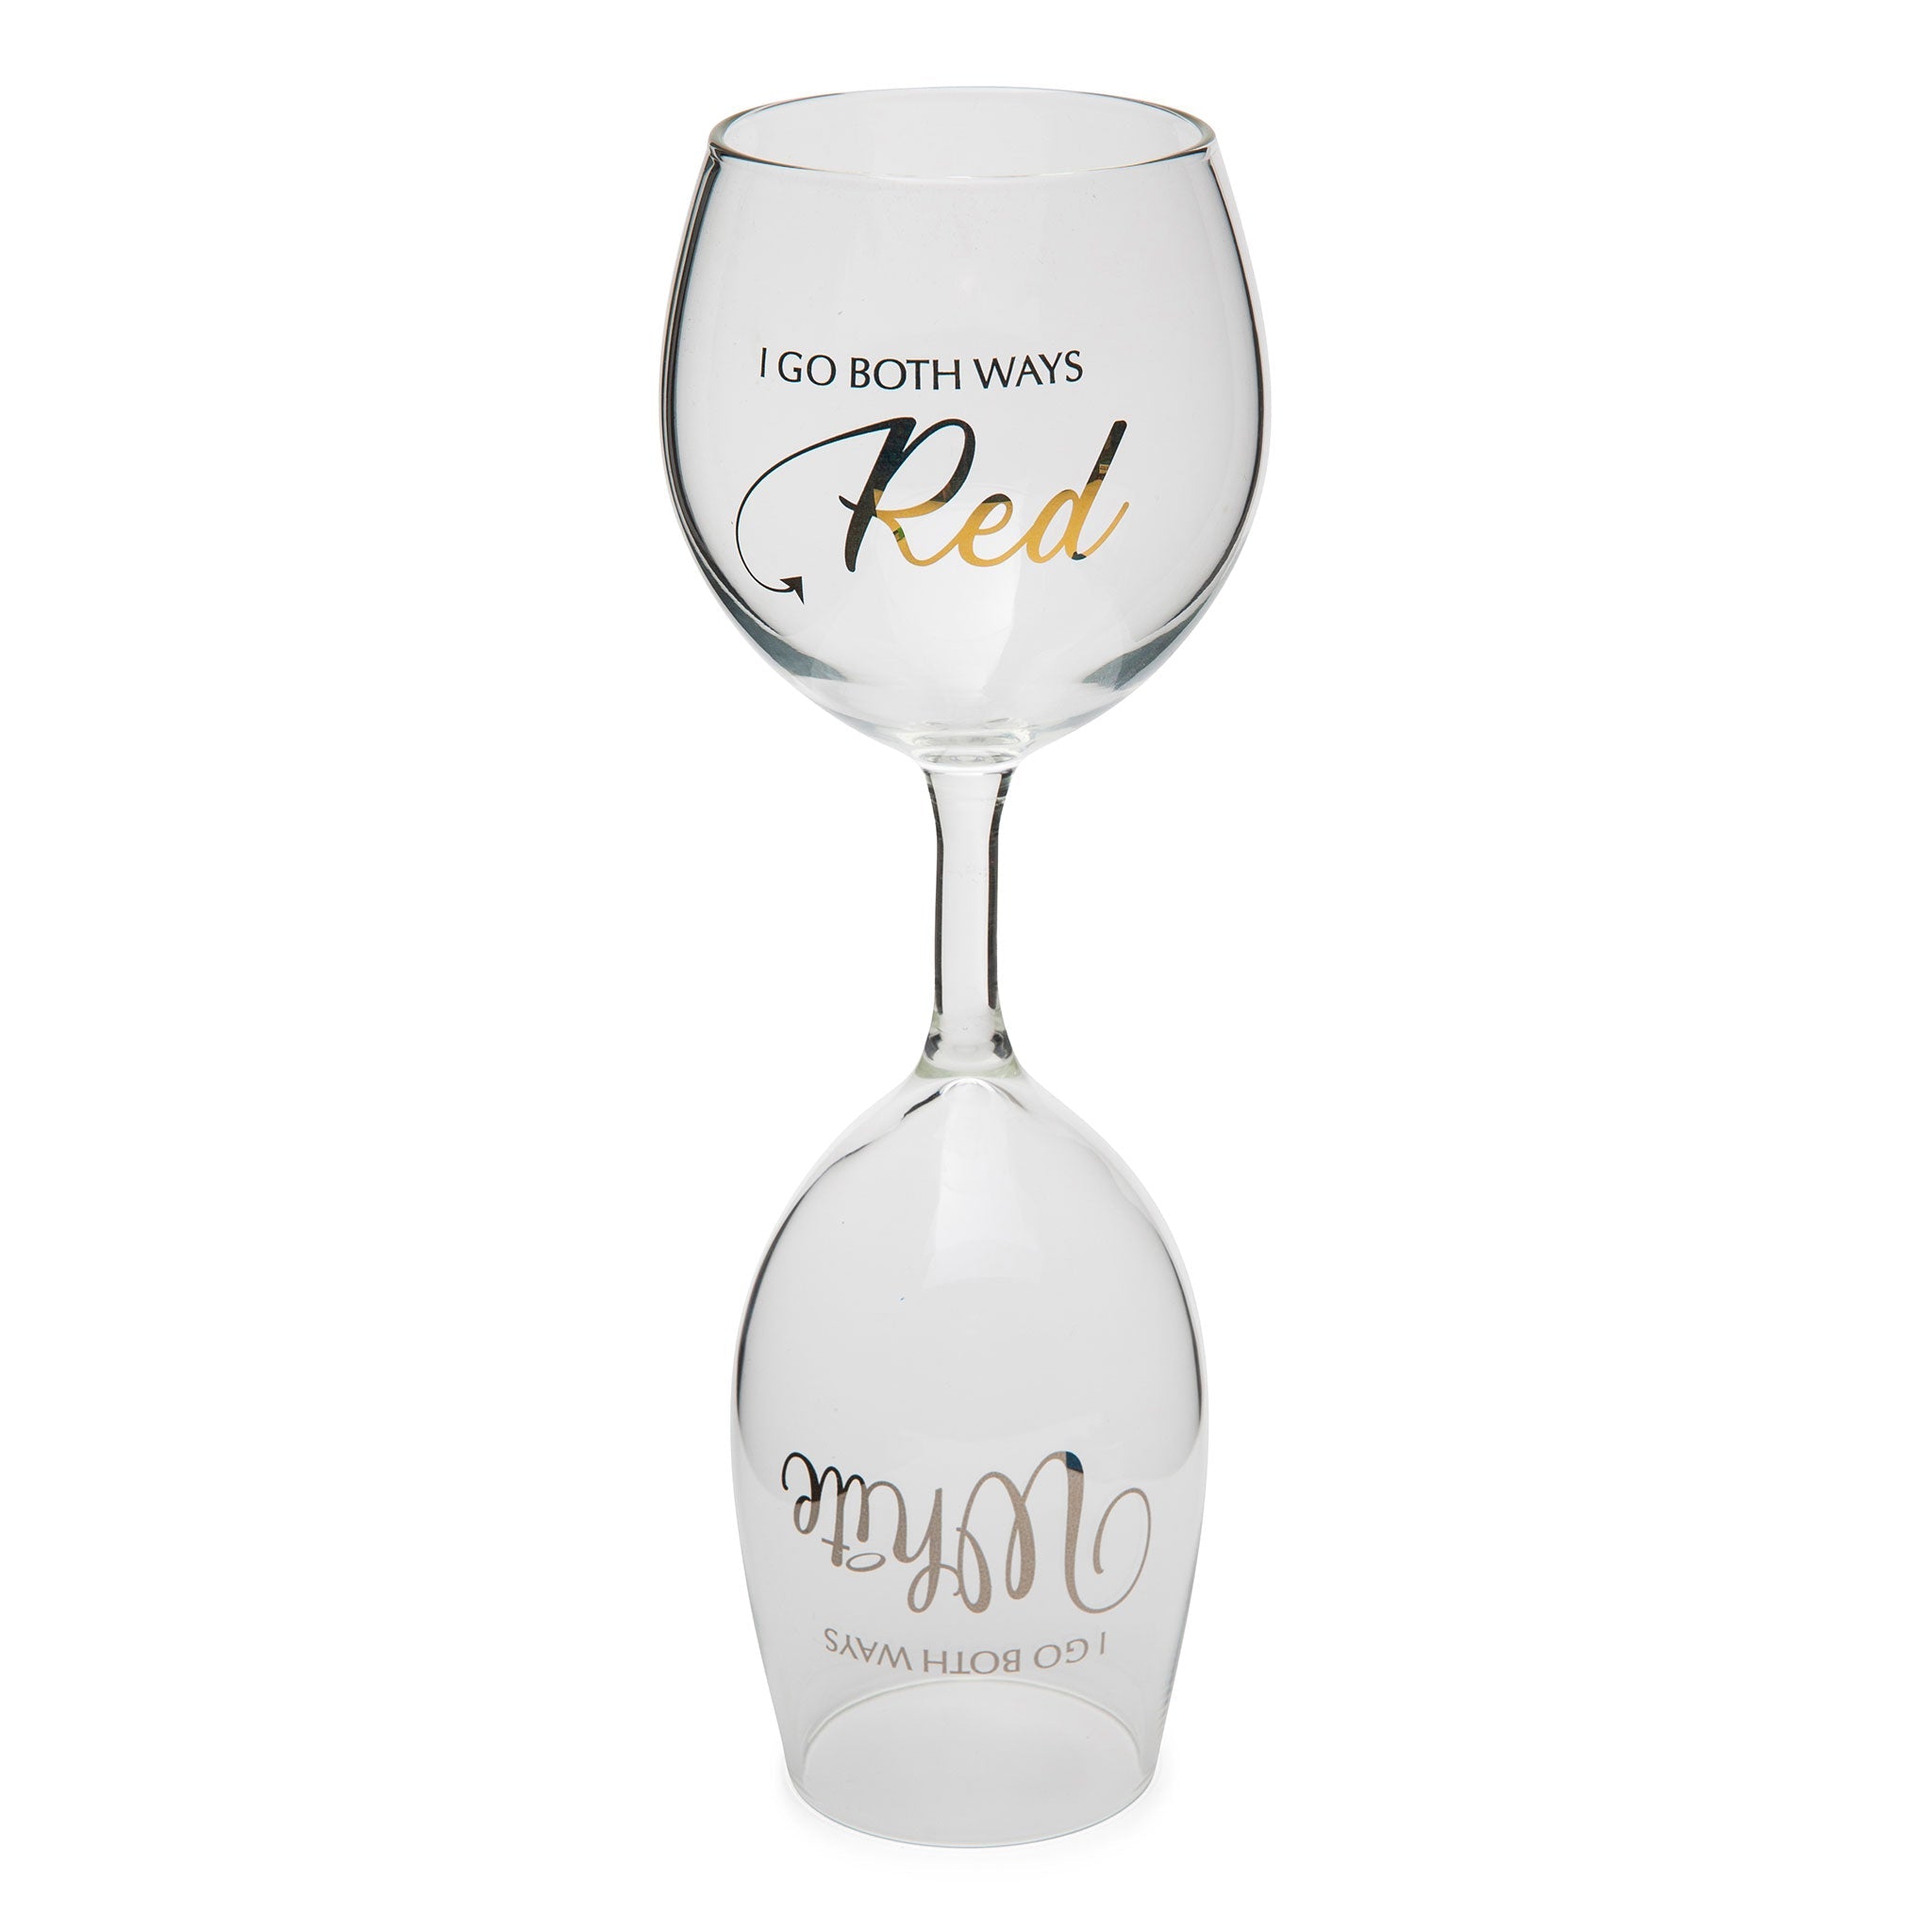 BigMouth Inc Bottomless Mimosa Glass, Funny Novelty Wine Glass, Holds 750  ml of Drink, Single XL Flute, Great for Breakfast and Brunch Parties